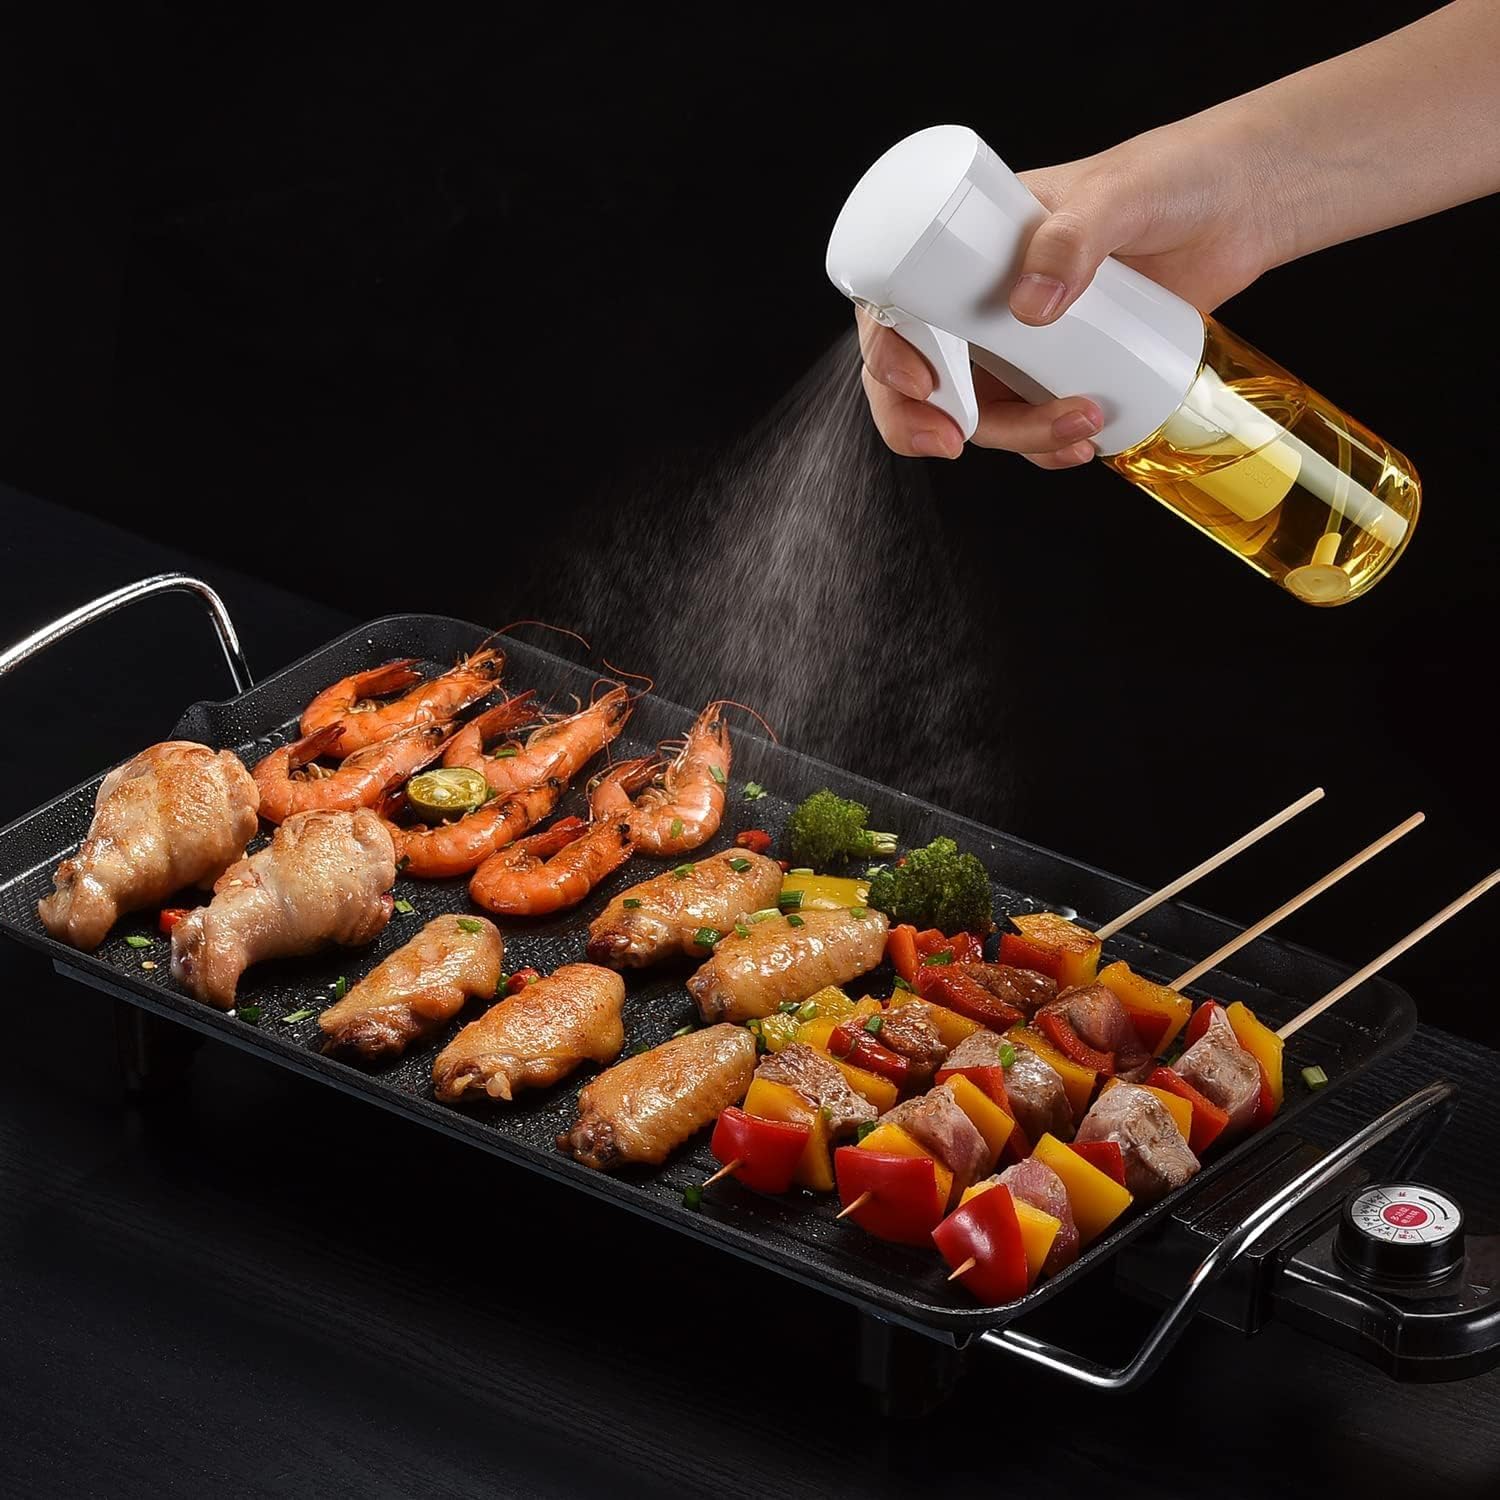 (🎁Early Christmas Sale 50% OFF) Oil Sprayer for frying steak, grilling, baking, salad, air fryer